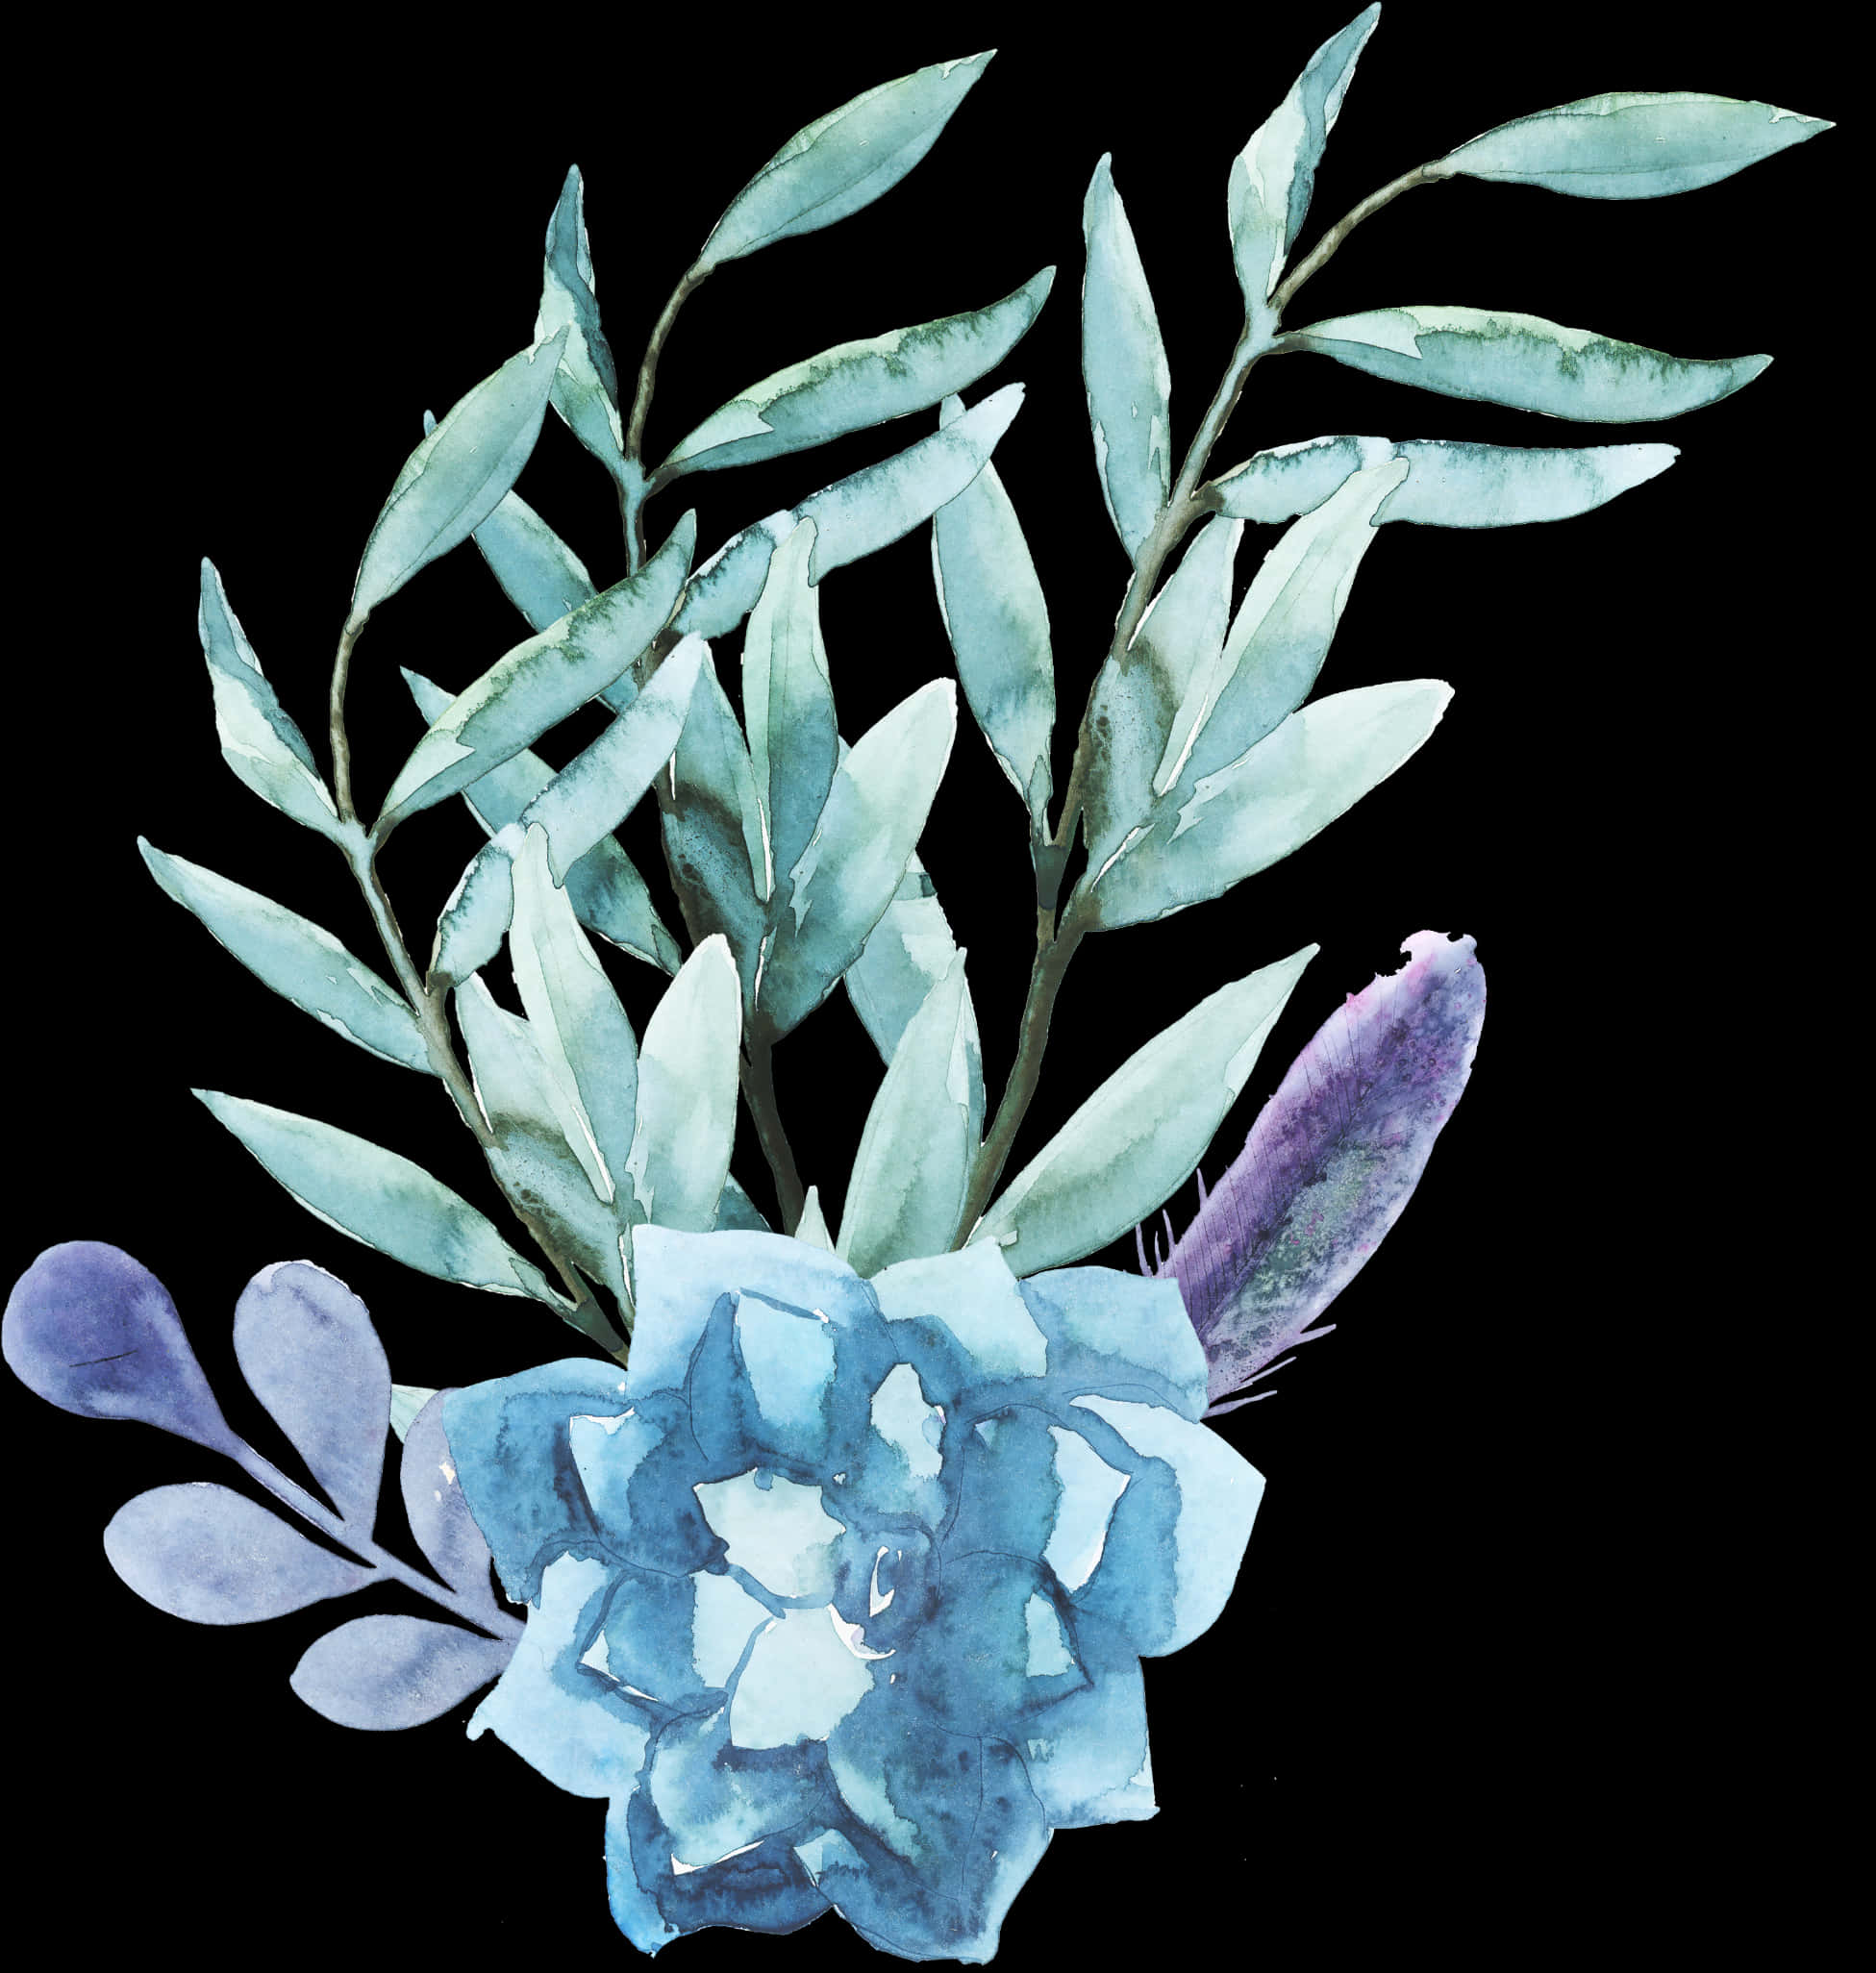 A Blue Flower With Leaves